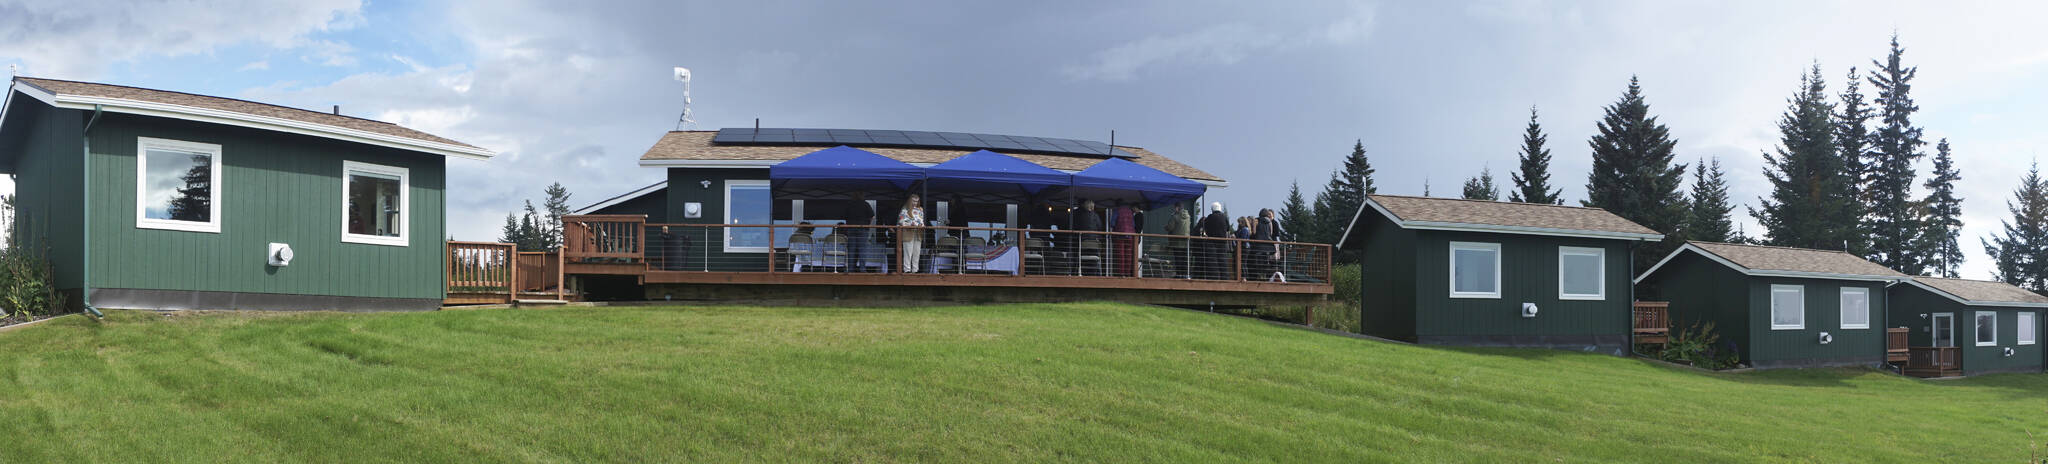 Visitors gather on the deck of Eva, the main house of the Storyknife Writers Retreat, on Monday, Aug. 29, 2022, for an open house. The six writers cabins are on either side of Eva. (Photo by Michael Armstrong/Homer News)